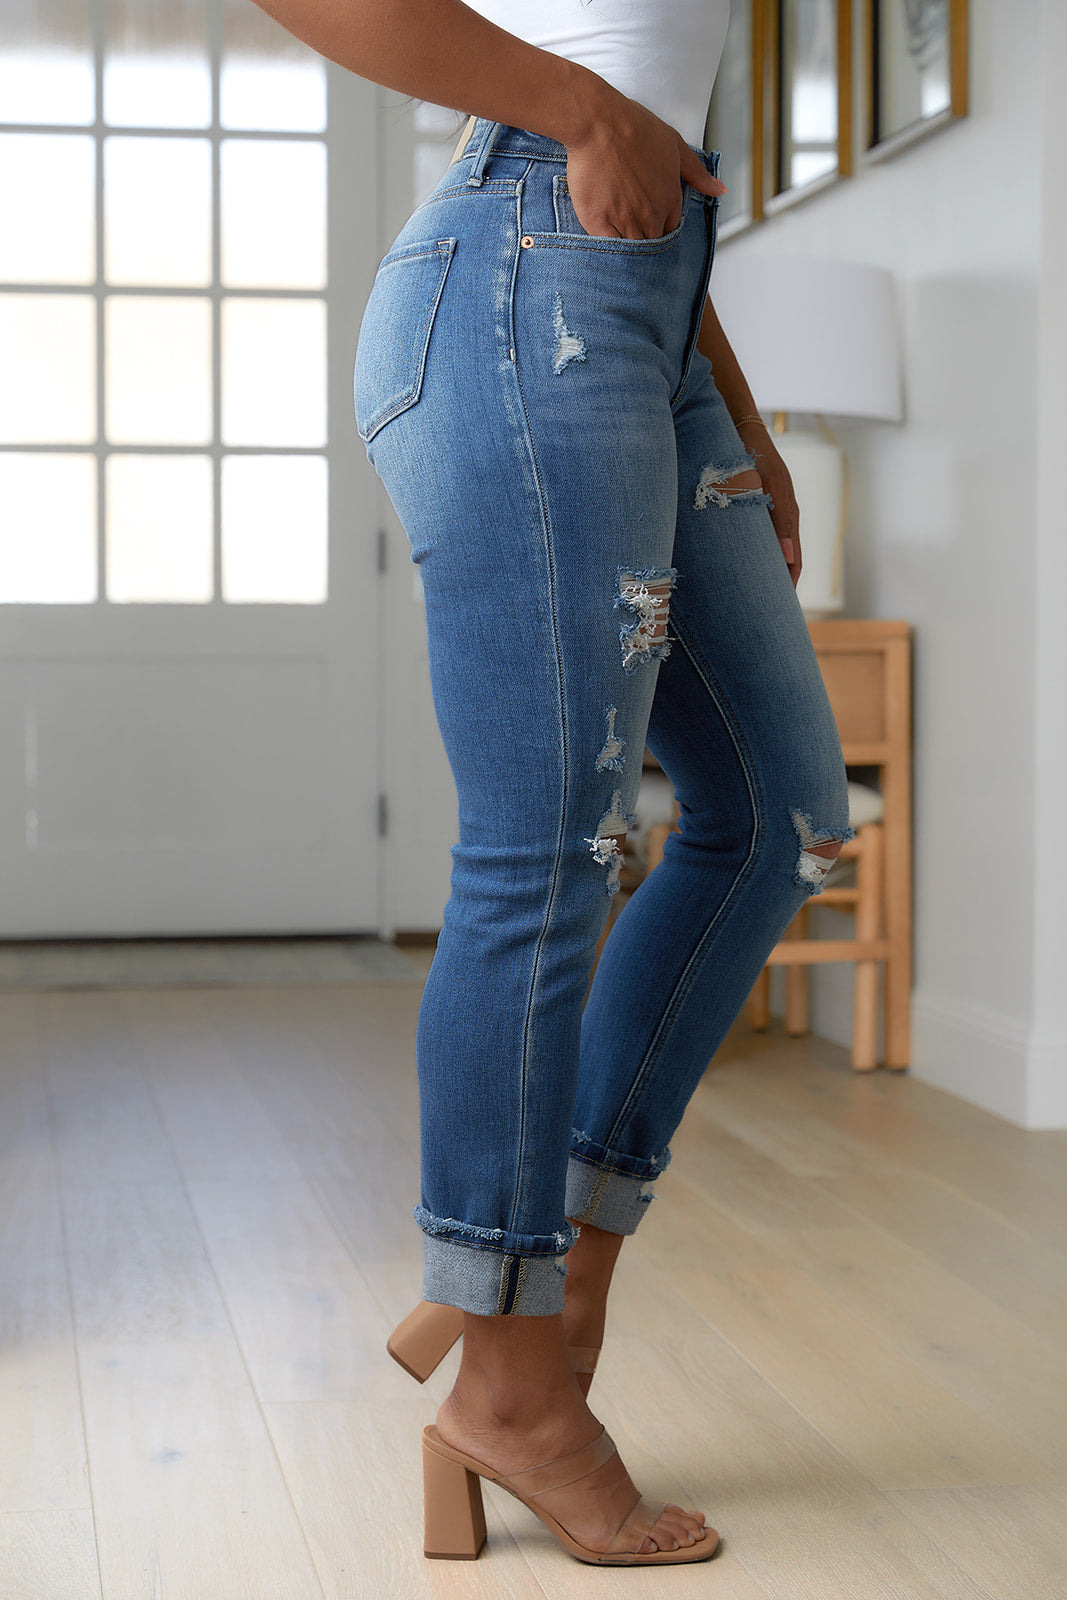 Load image into Gallery viewer, Belinda High Rise Distressed Straight Jeans
